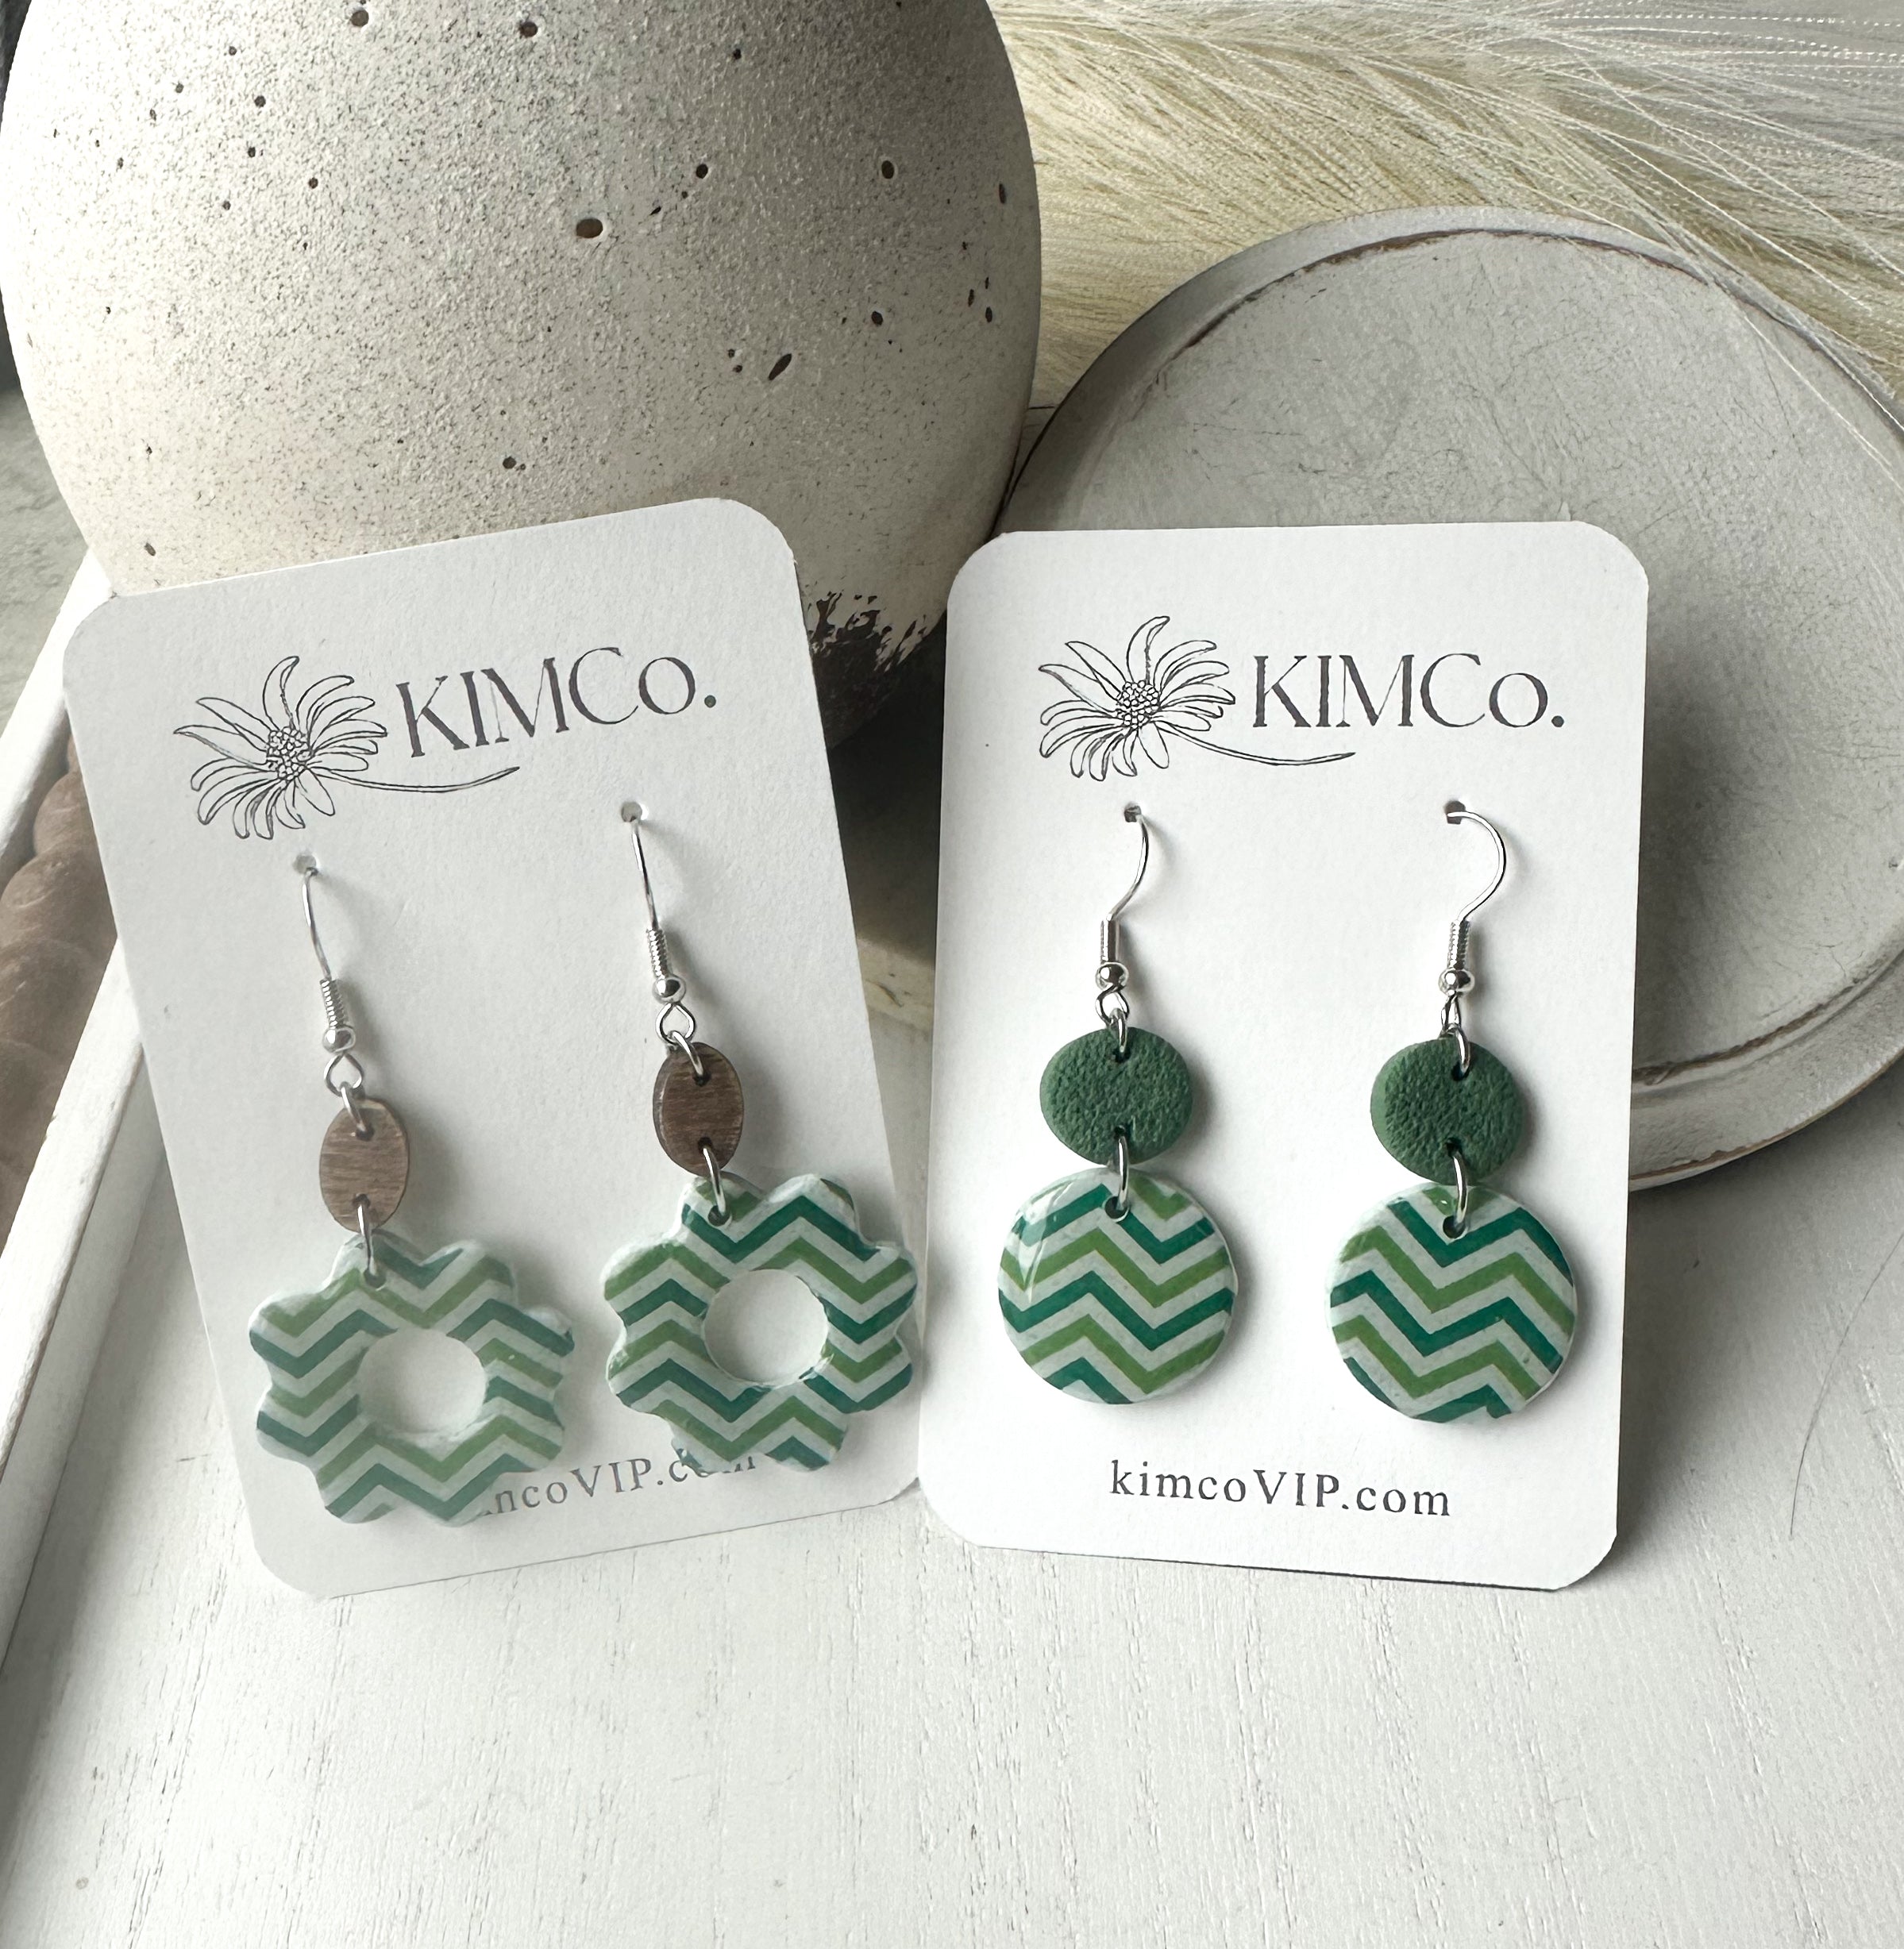 St. Patrick's Day Polymer Clay Earrings|statement earrings|gifts for her|colorful earrings|boho earrings|abstract earrings|green earrings|shamrocks|St. Patricks Day